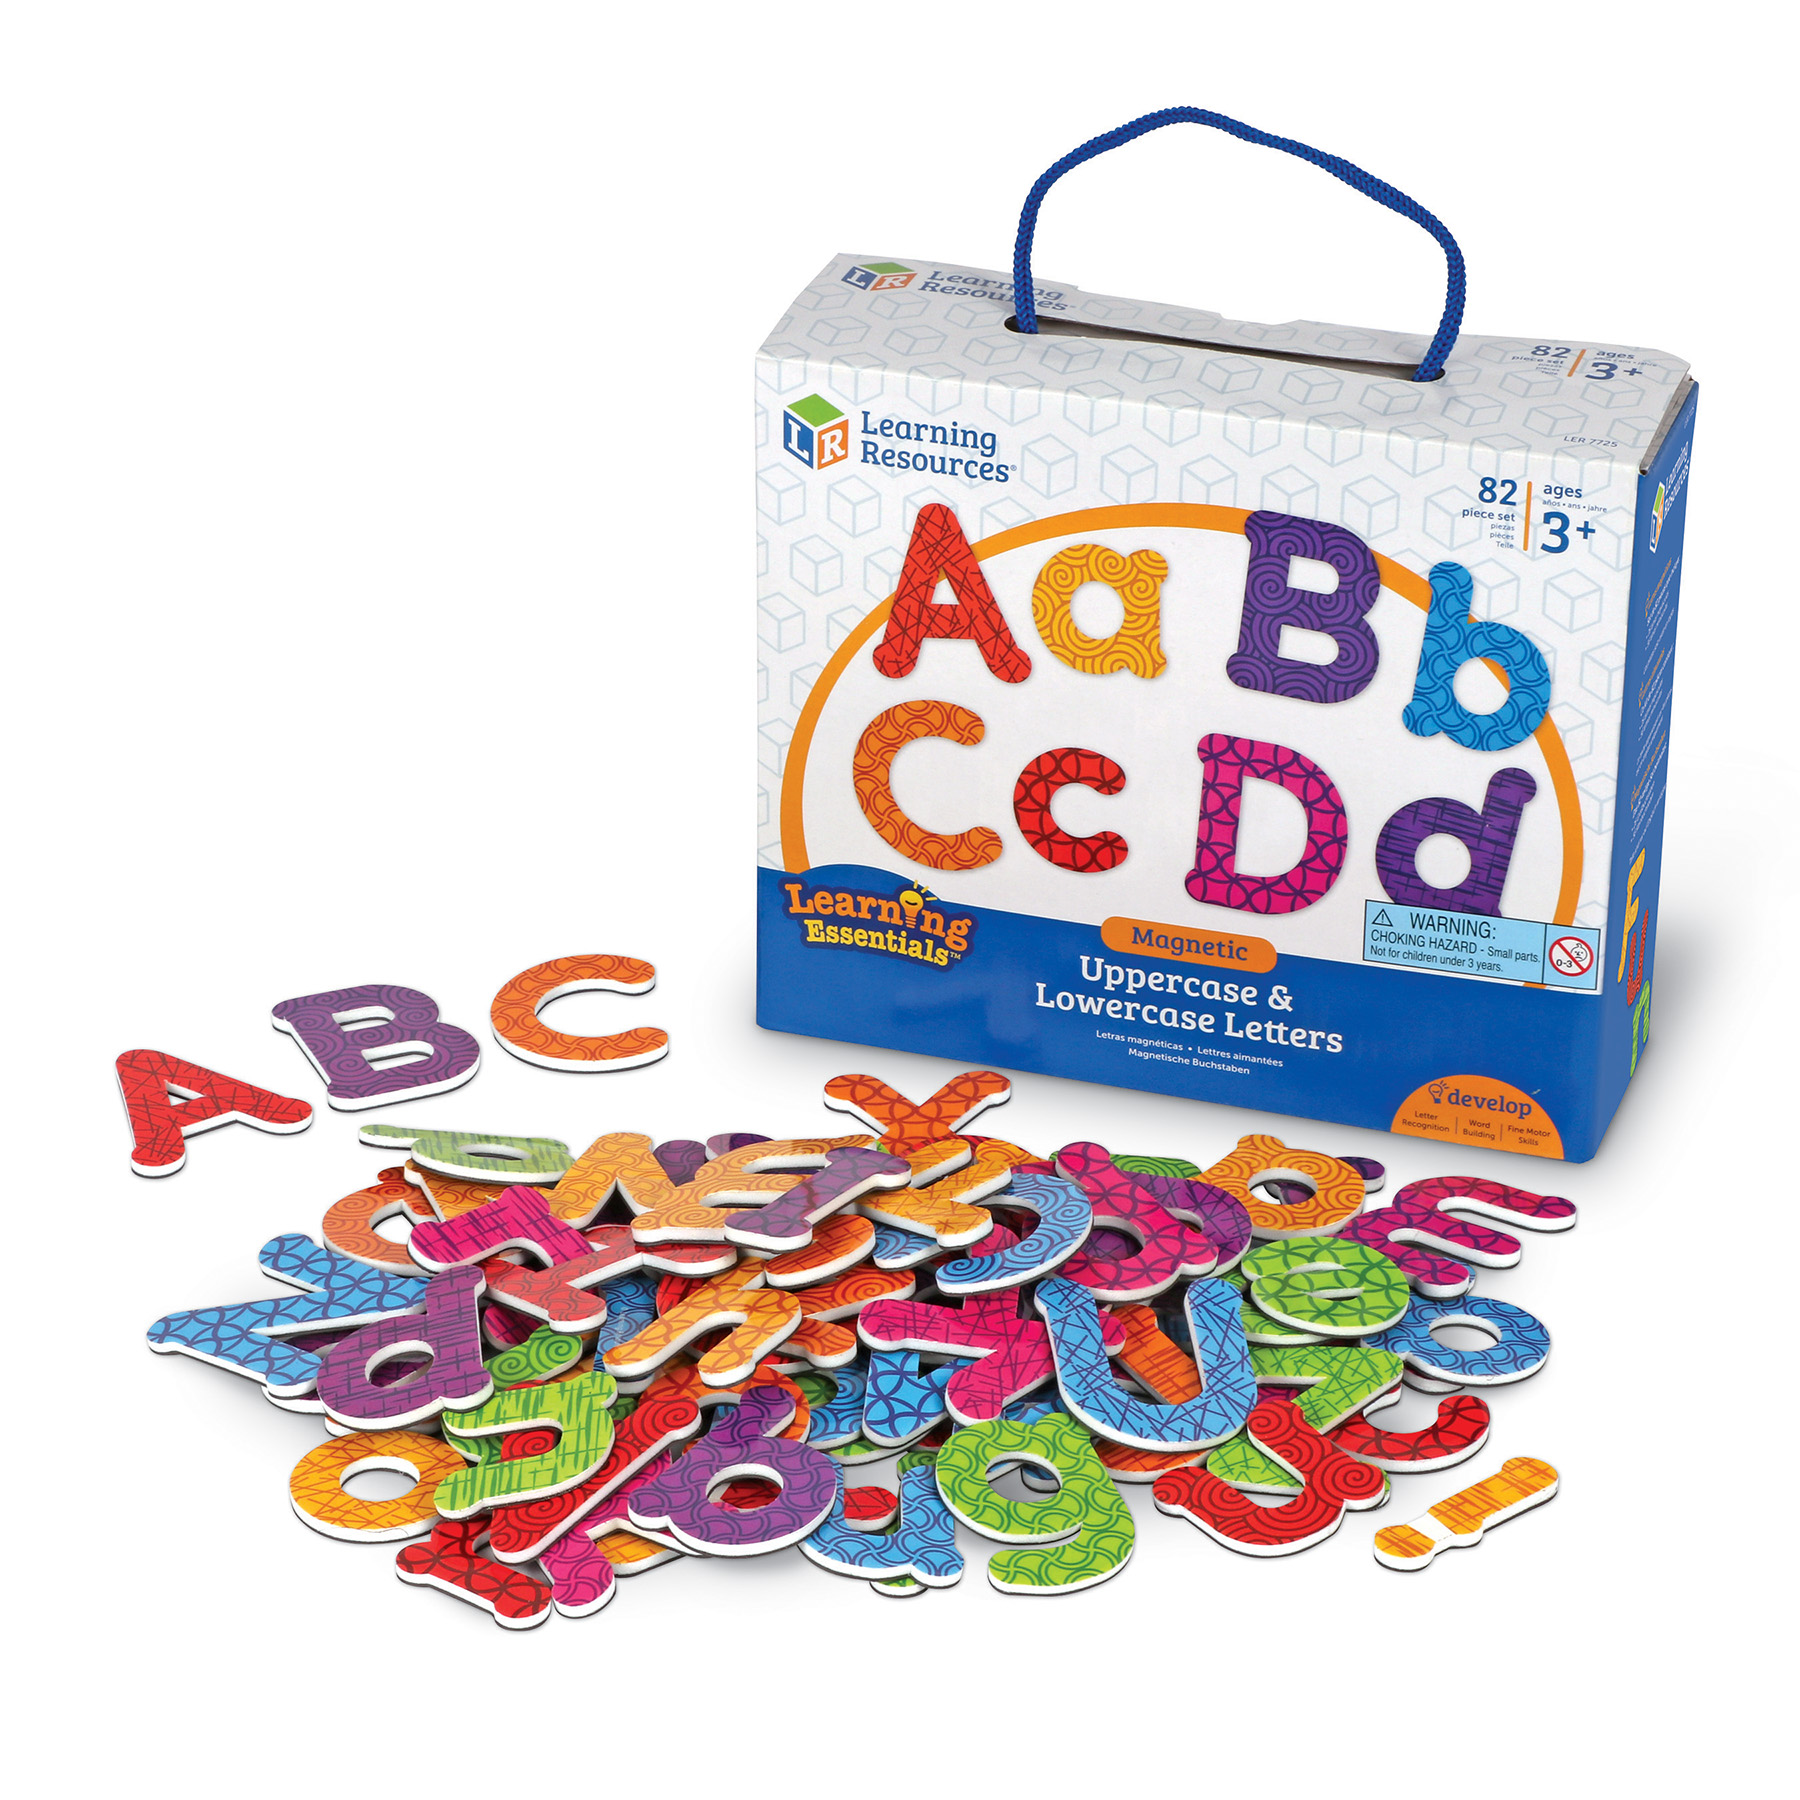 Learning Resources Magnetic Uppercase & Lowercase Letters, 82-Piece Set